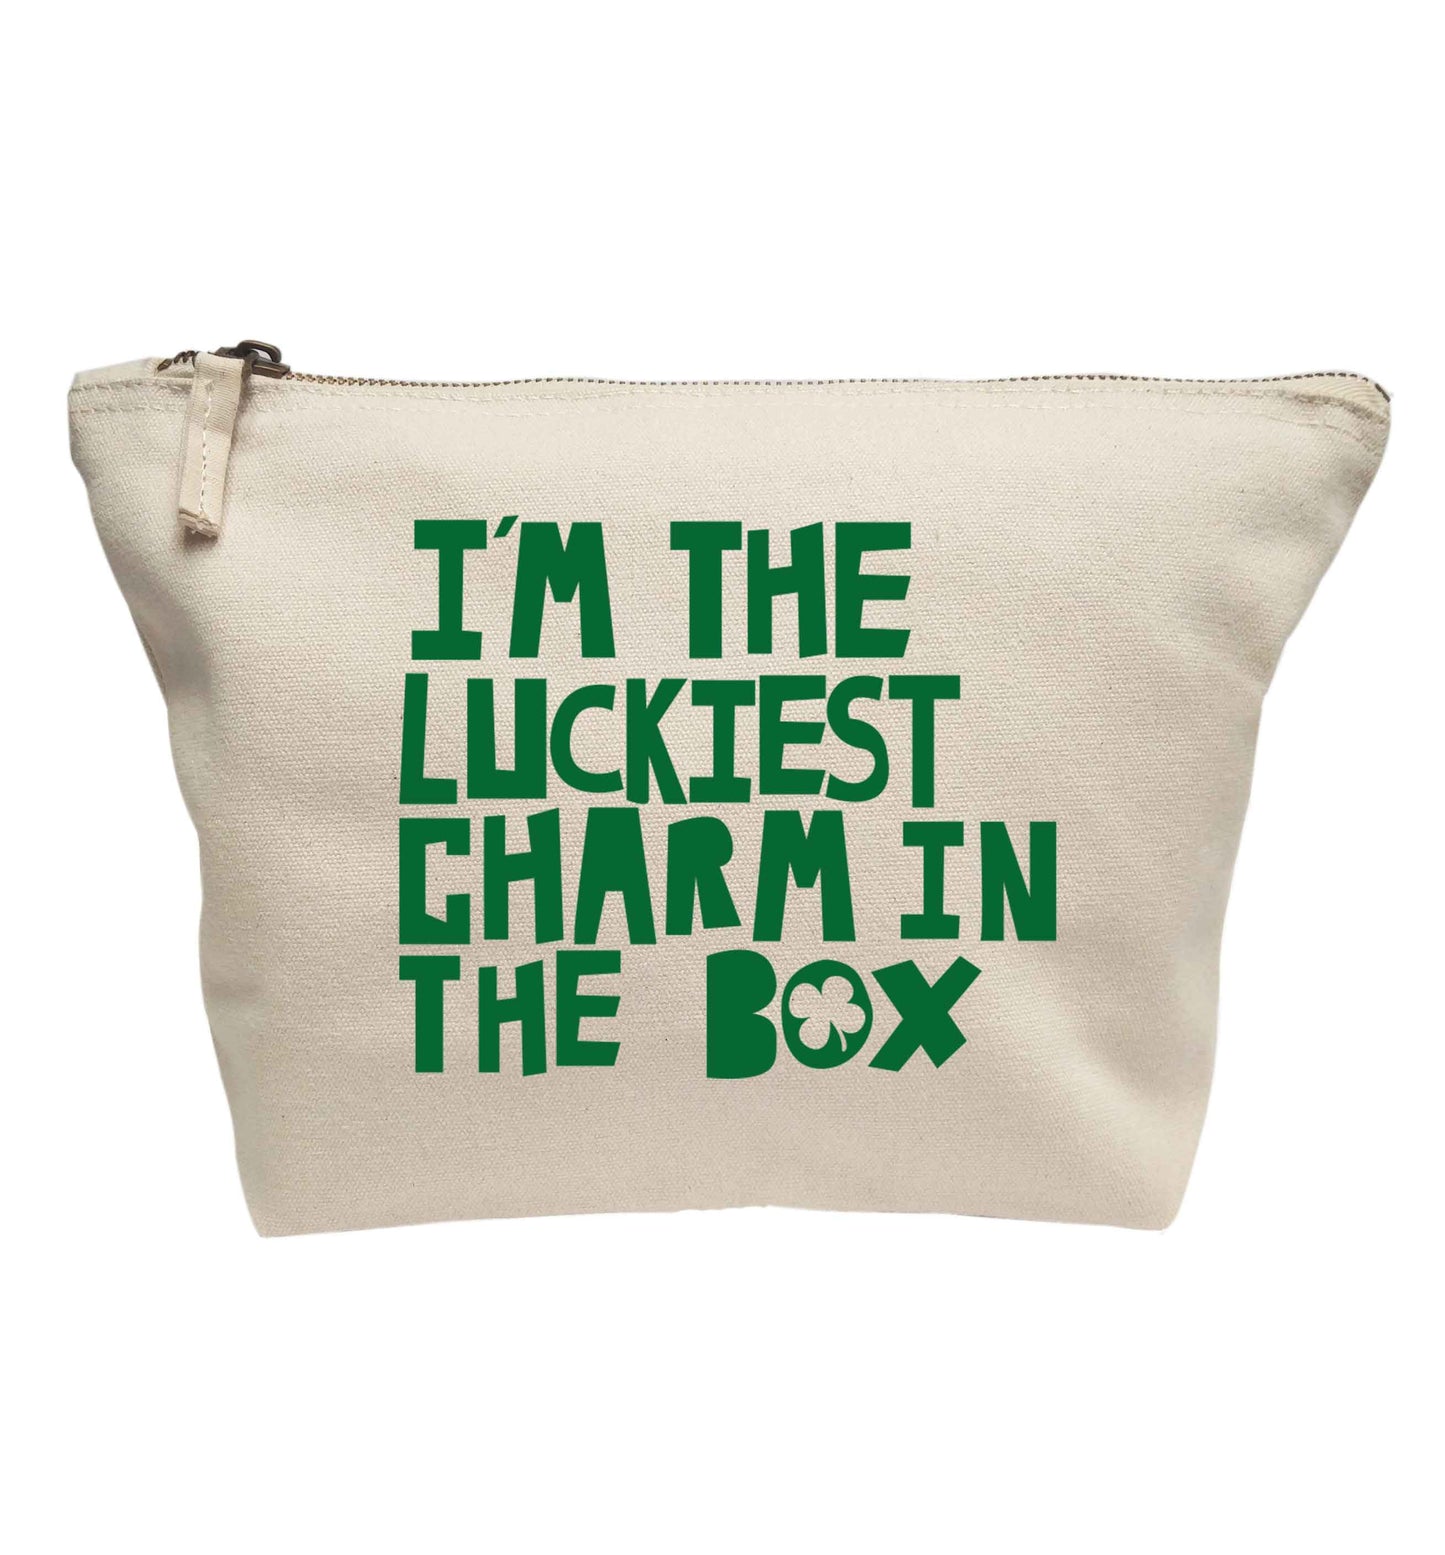 I'm the luckiest charm in the box | Makeup / wash bag